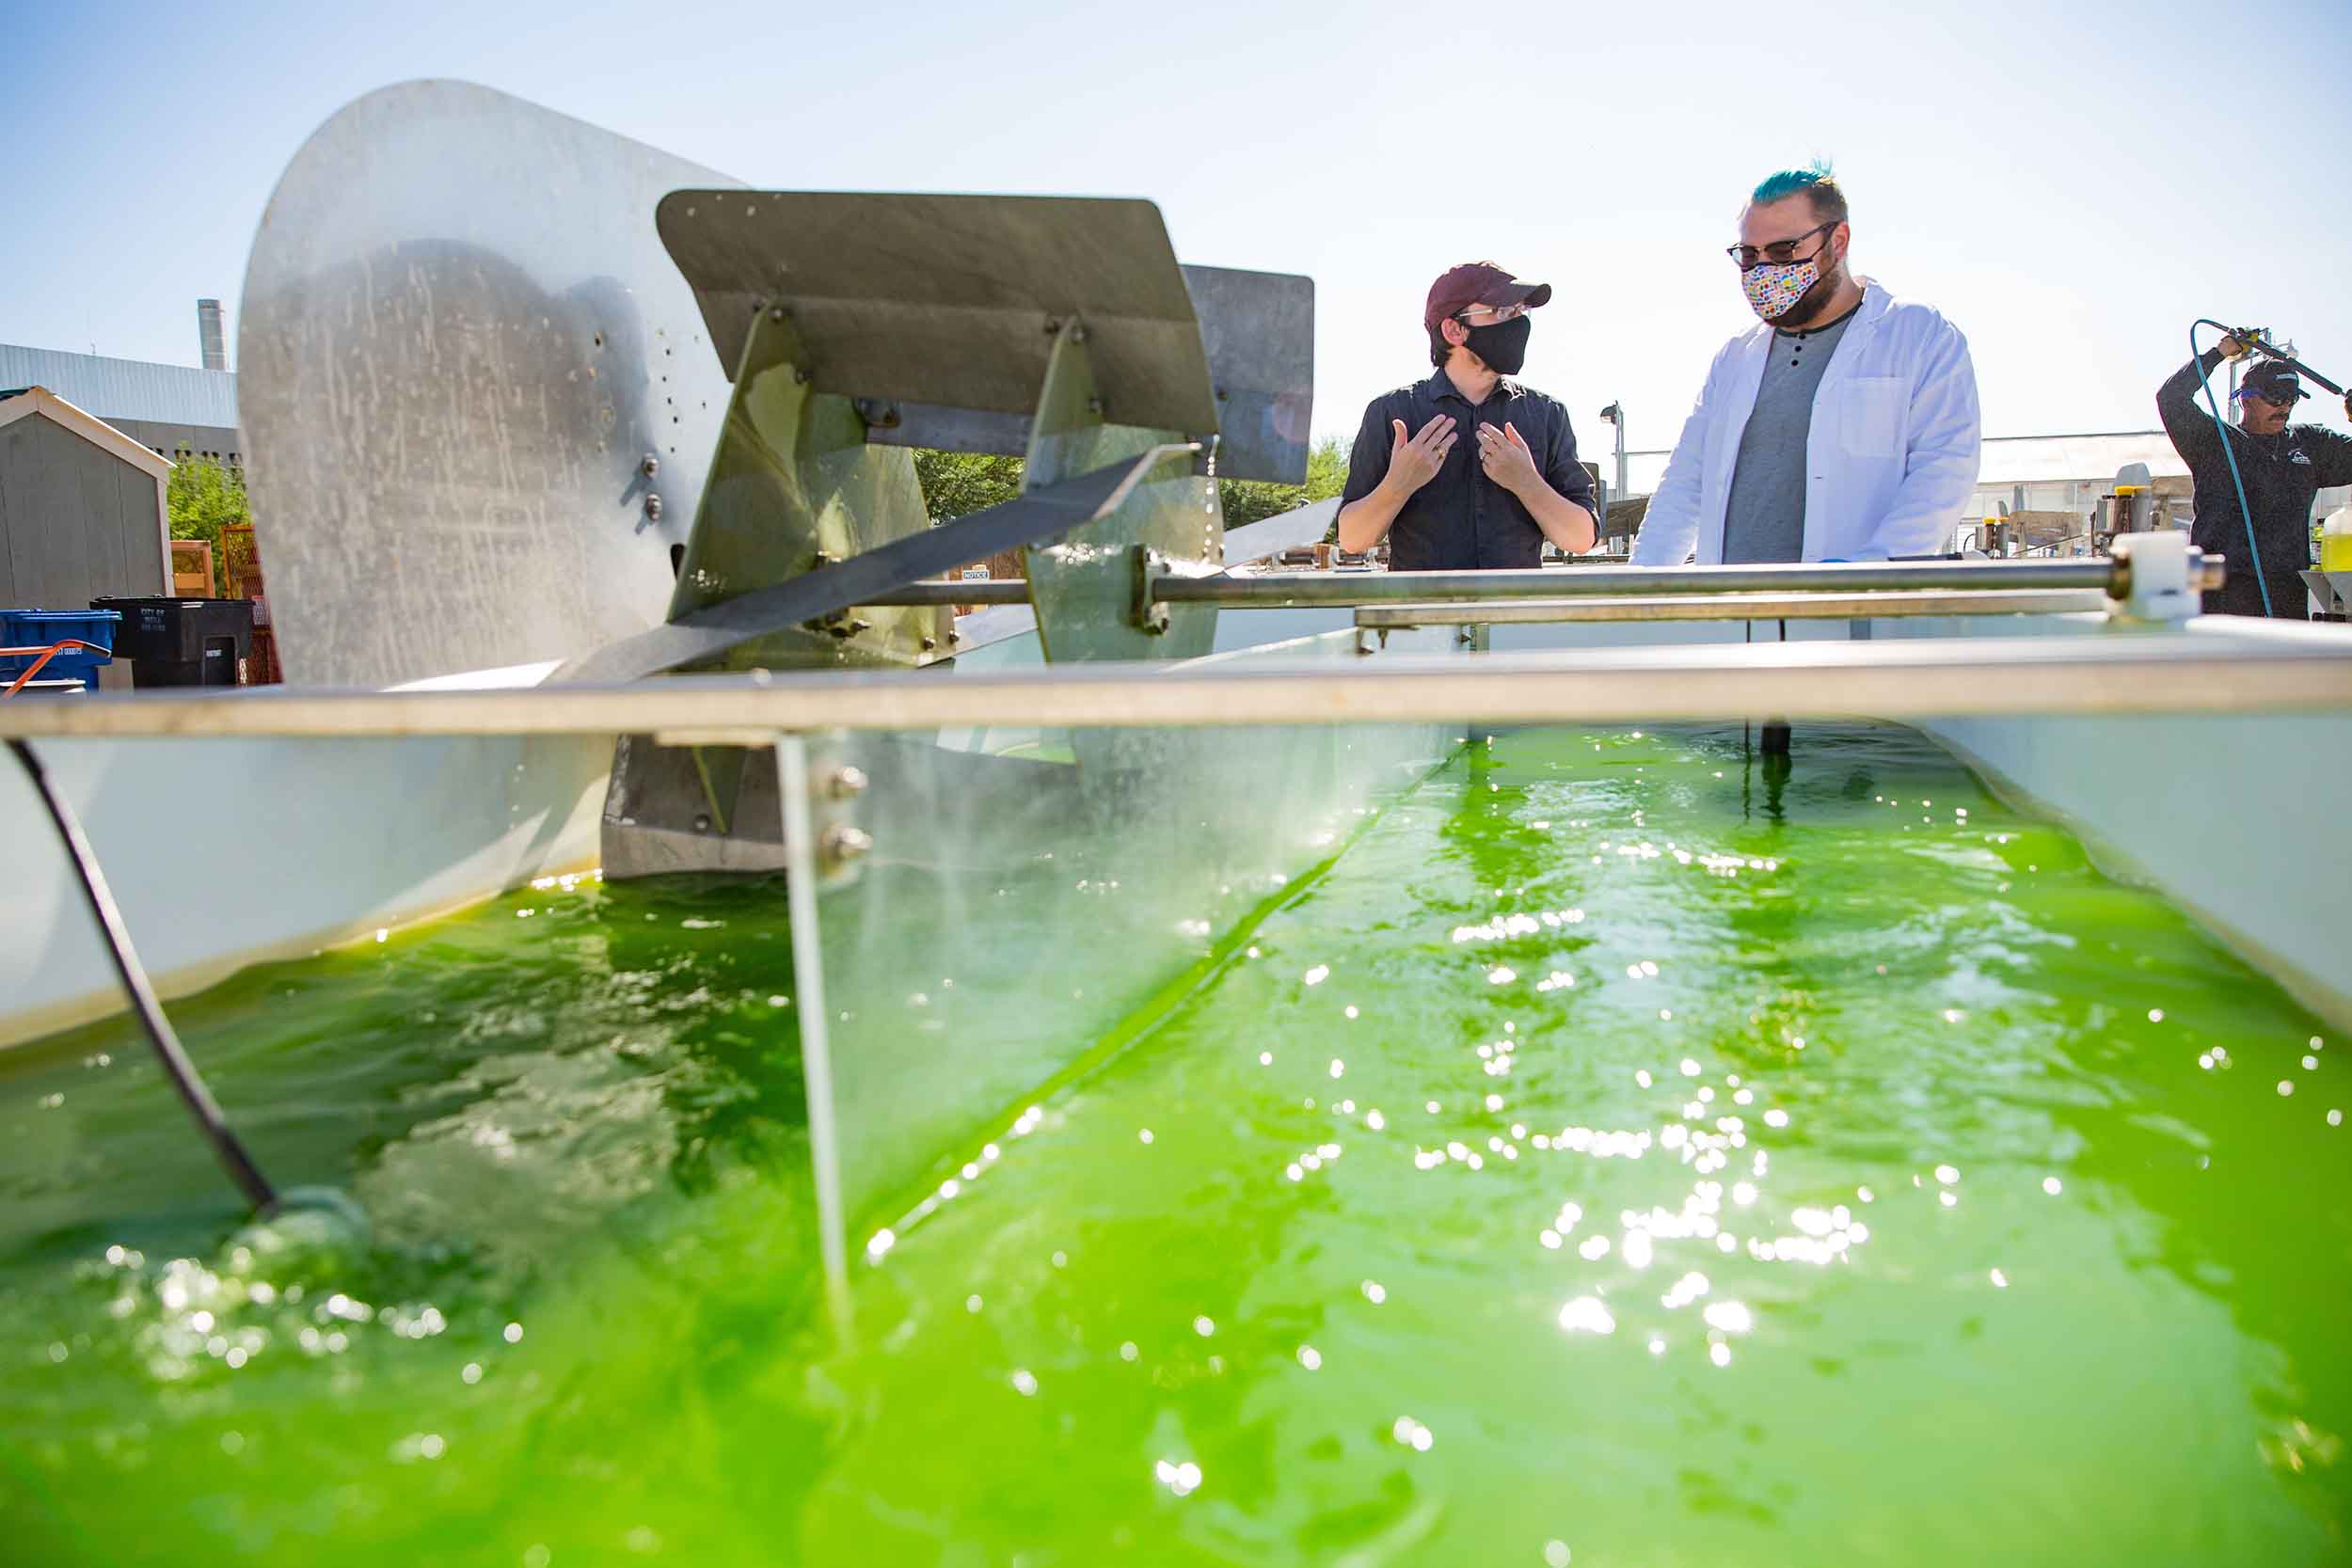 Taylor Weiss and Duane Barbano stand outside in the bright Arizona sun next to a gigantic vat of churning water full of bright green algae